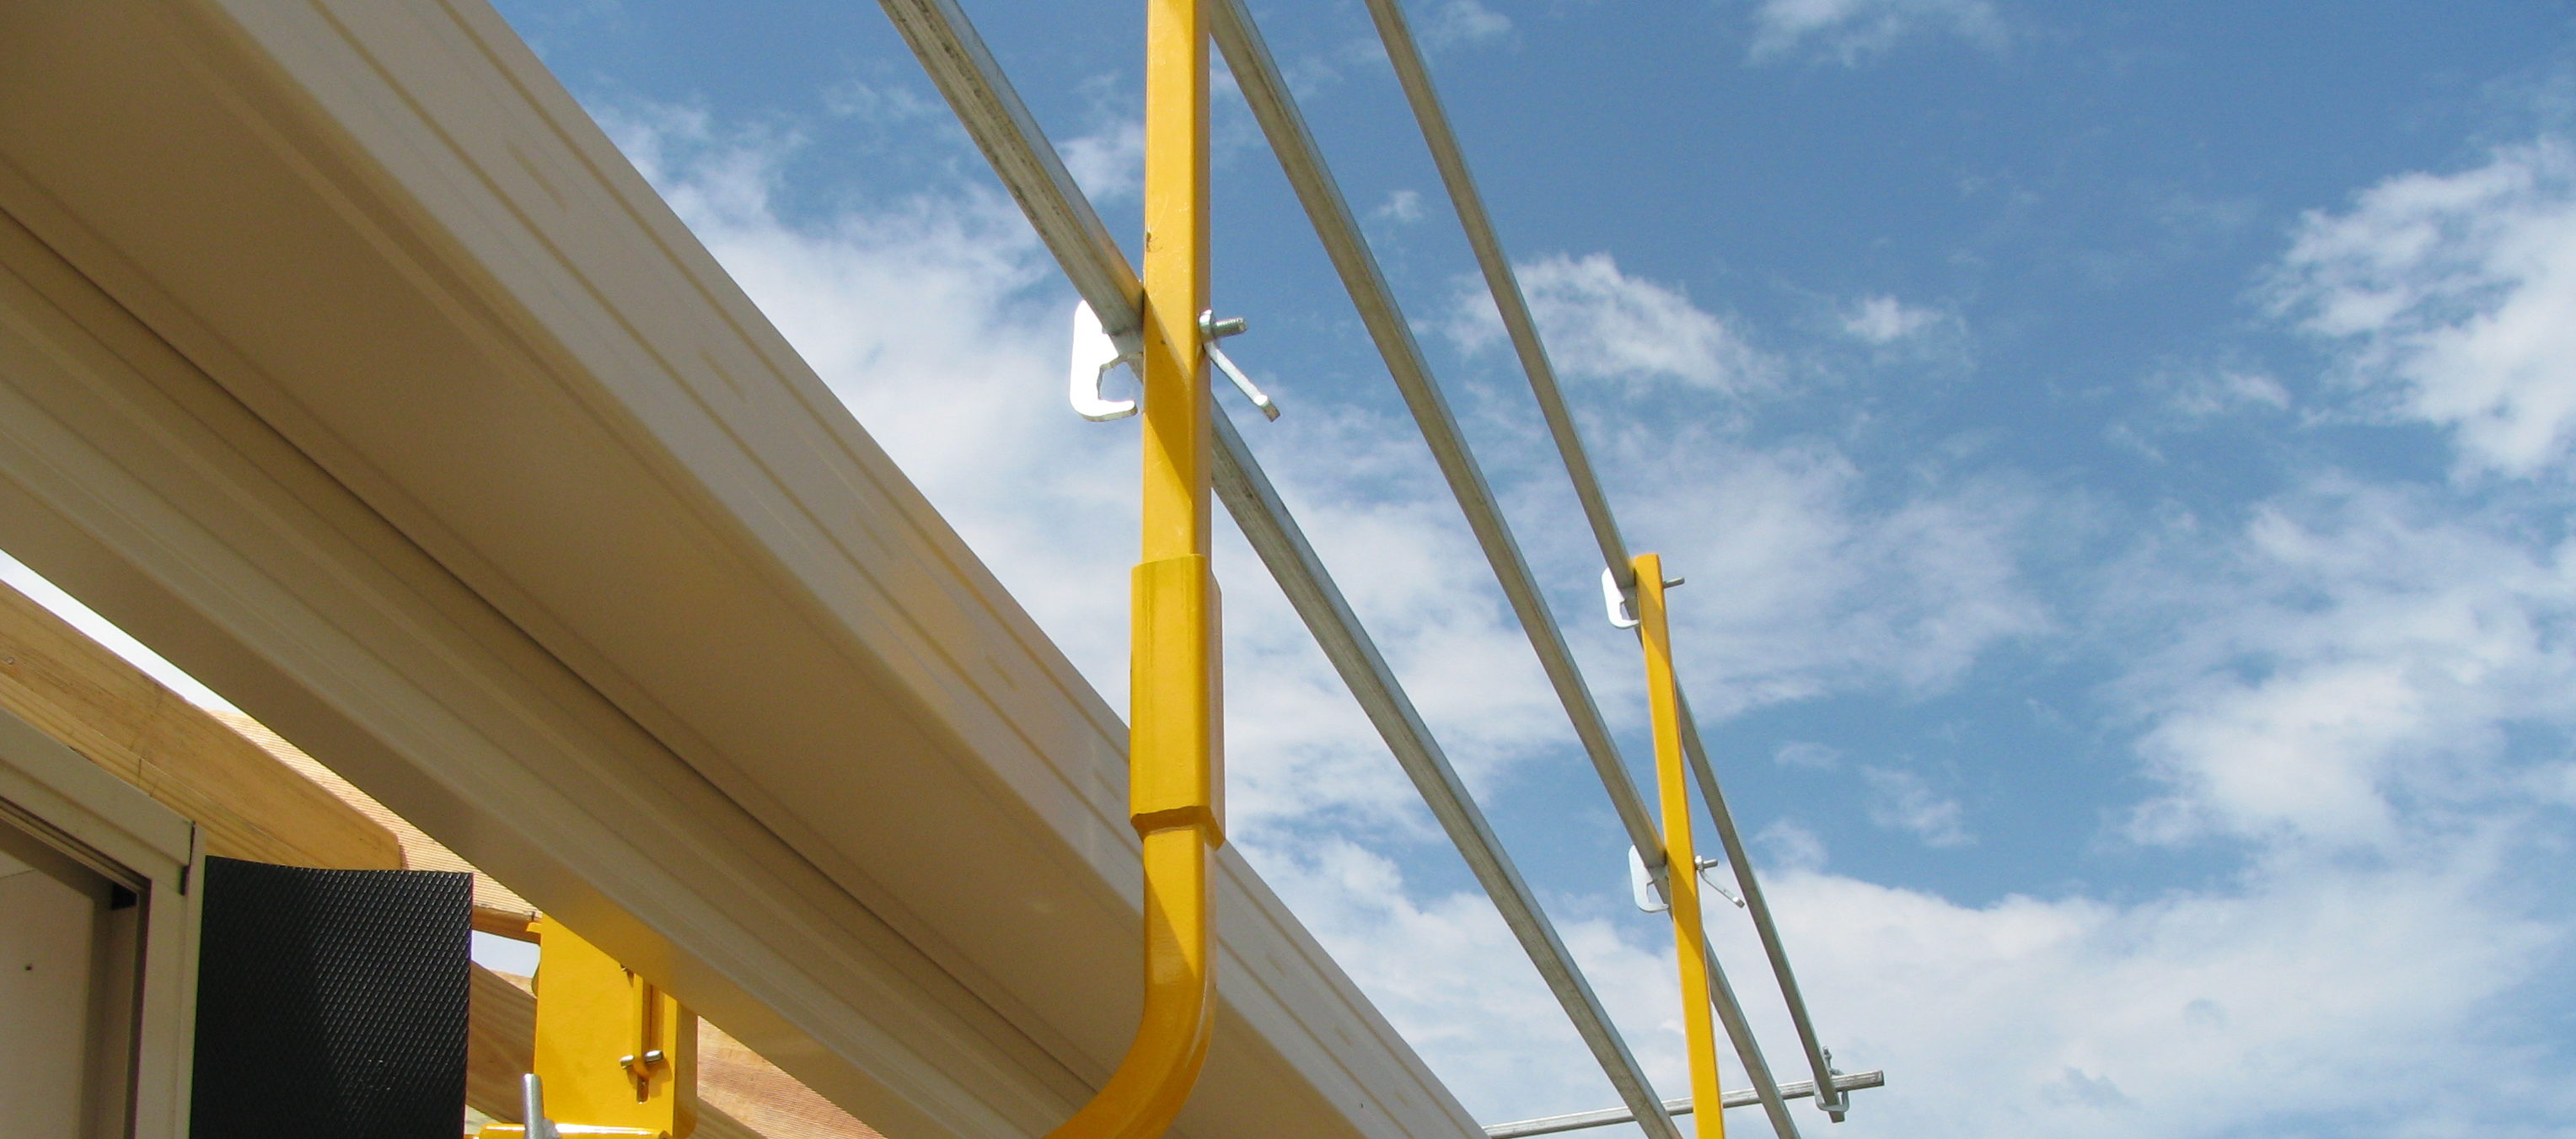 About Advanced Edge Protection & Scaffolding